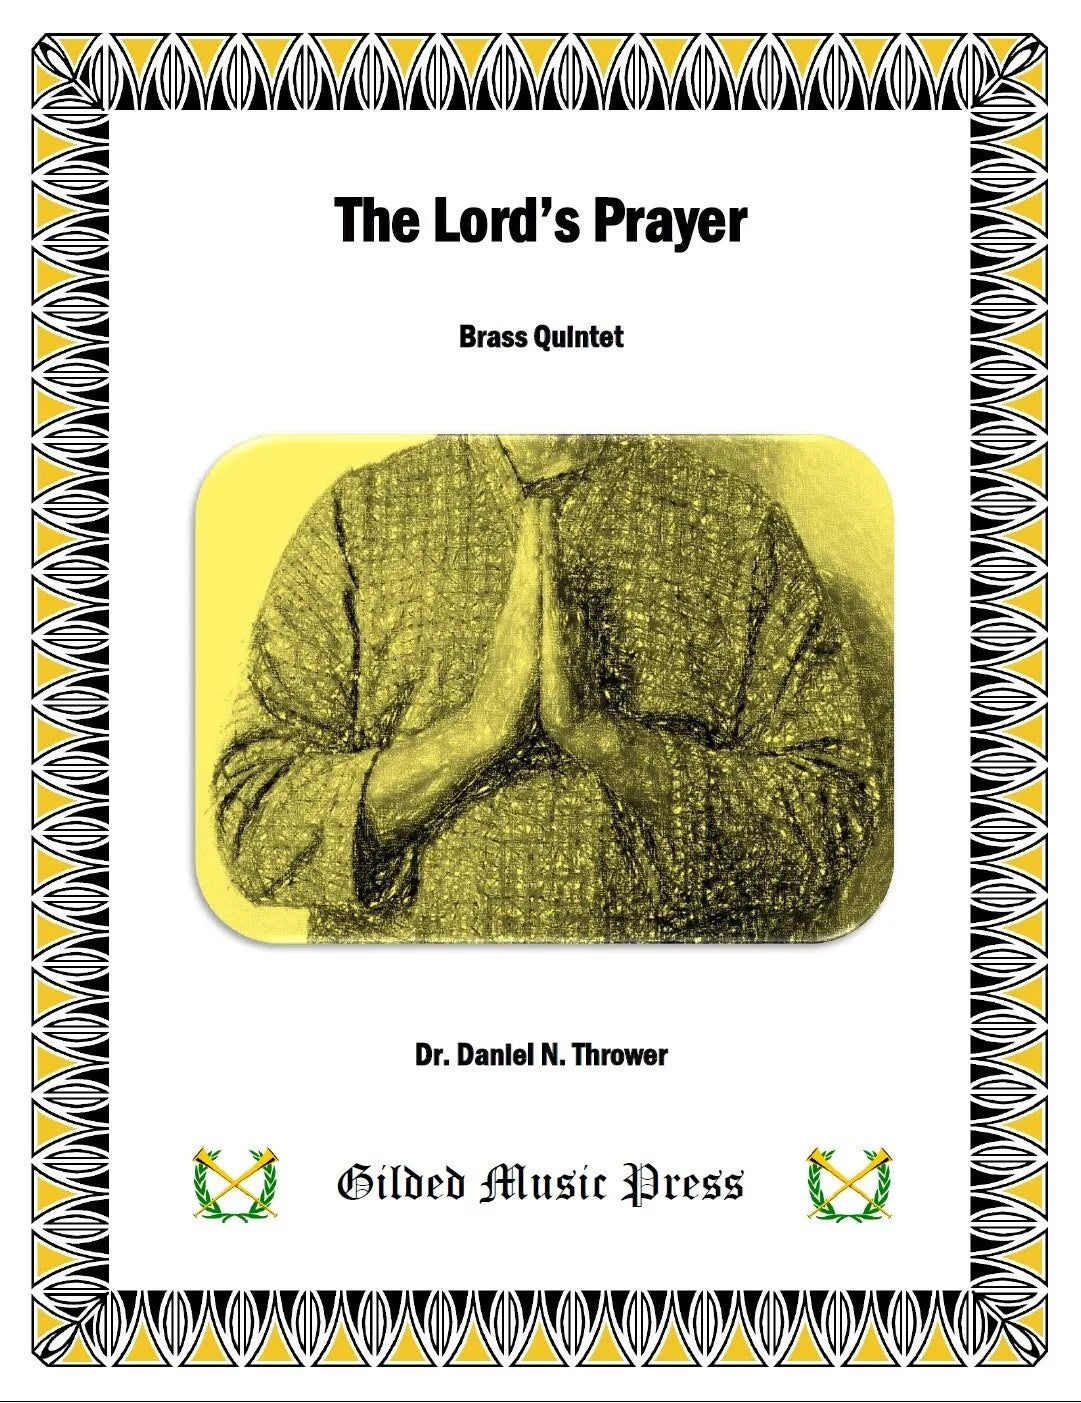 The Lord's Prayer, Dr. Daniel Thrower